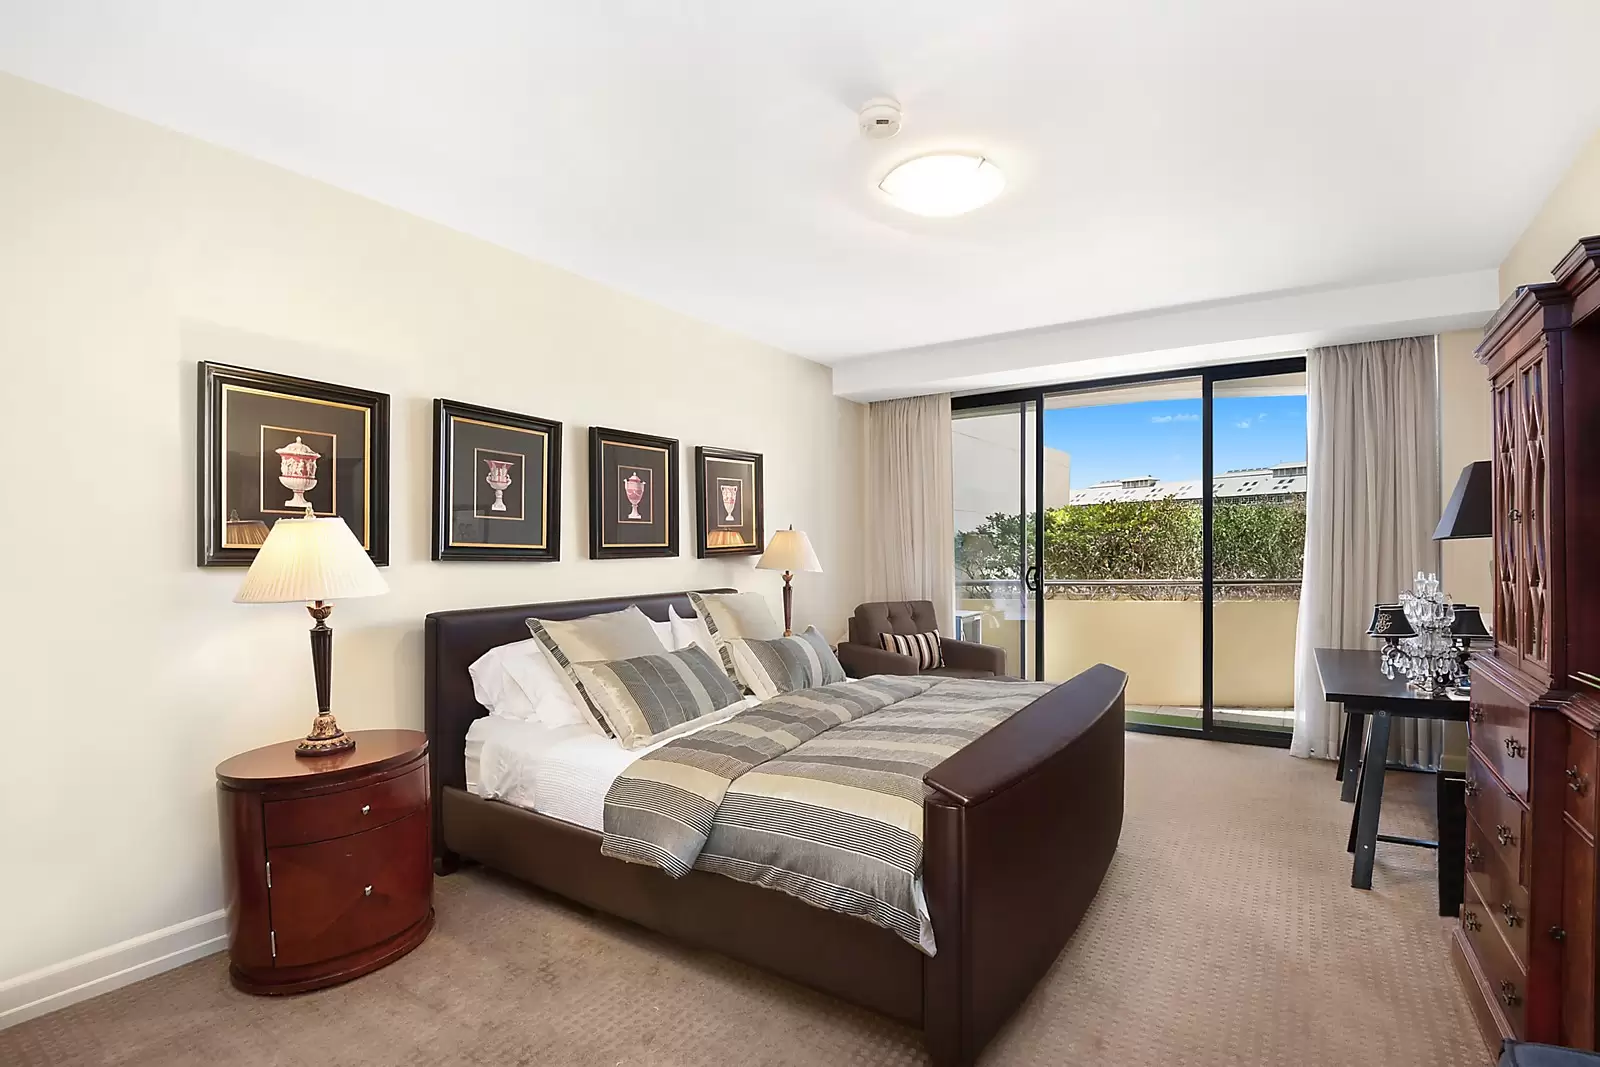 Photo #6: Residence 31 Marina Berth 20, 10 Lincoln Crescent, Woolloomooloo - Sold by Sydney Sotheby's International Realty